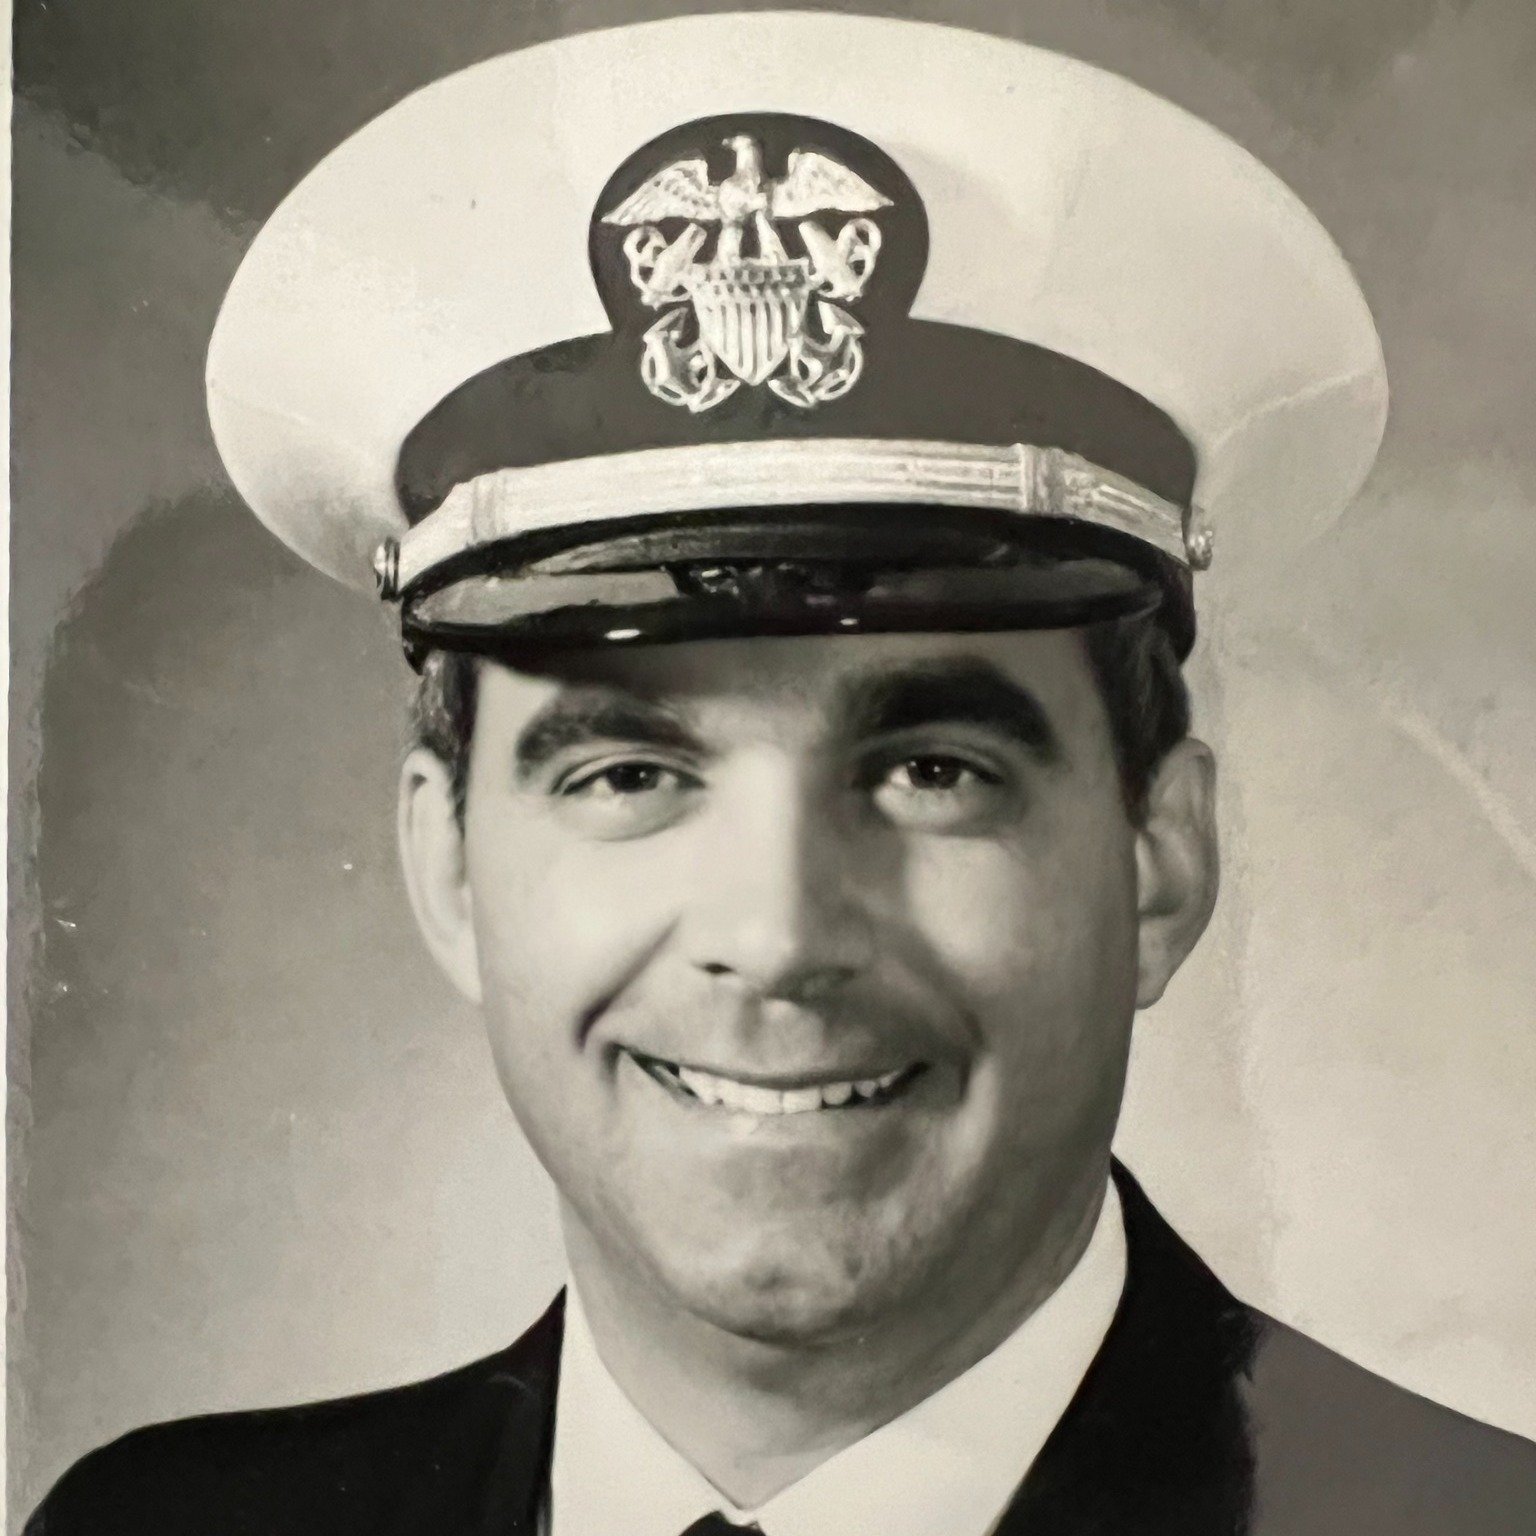 In honor of Military Appreciation month, all of us at Welcome Home express our Gratitude to those who served. 💛

Ross Tyler, a current Welcome Home volunteer, companion care and chaplain, served in USMC June 4, 1972 to Dec. 21,1974 in the Communicat